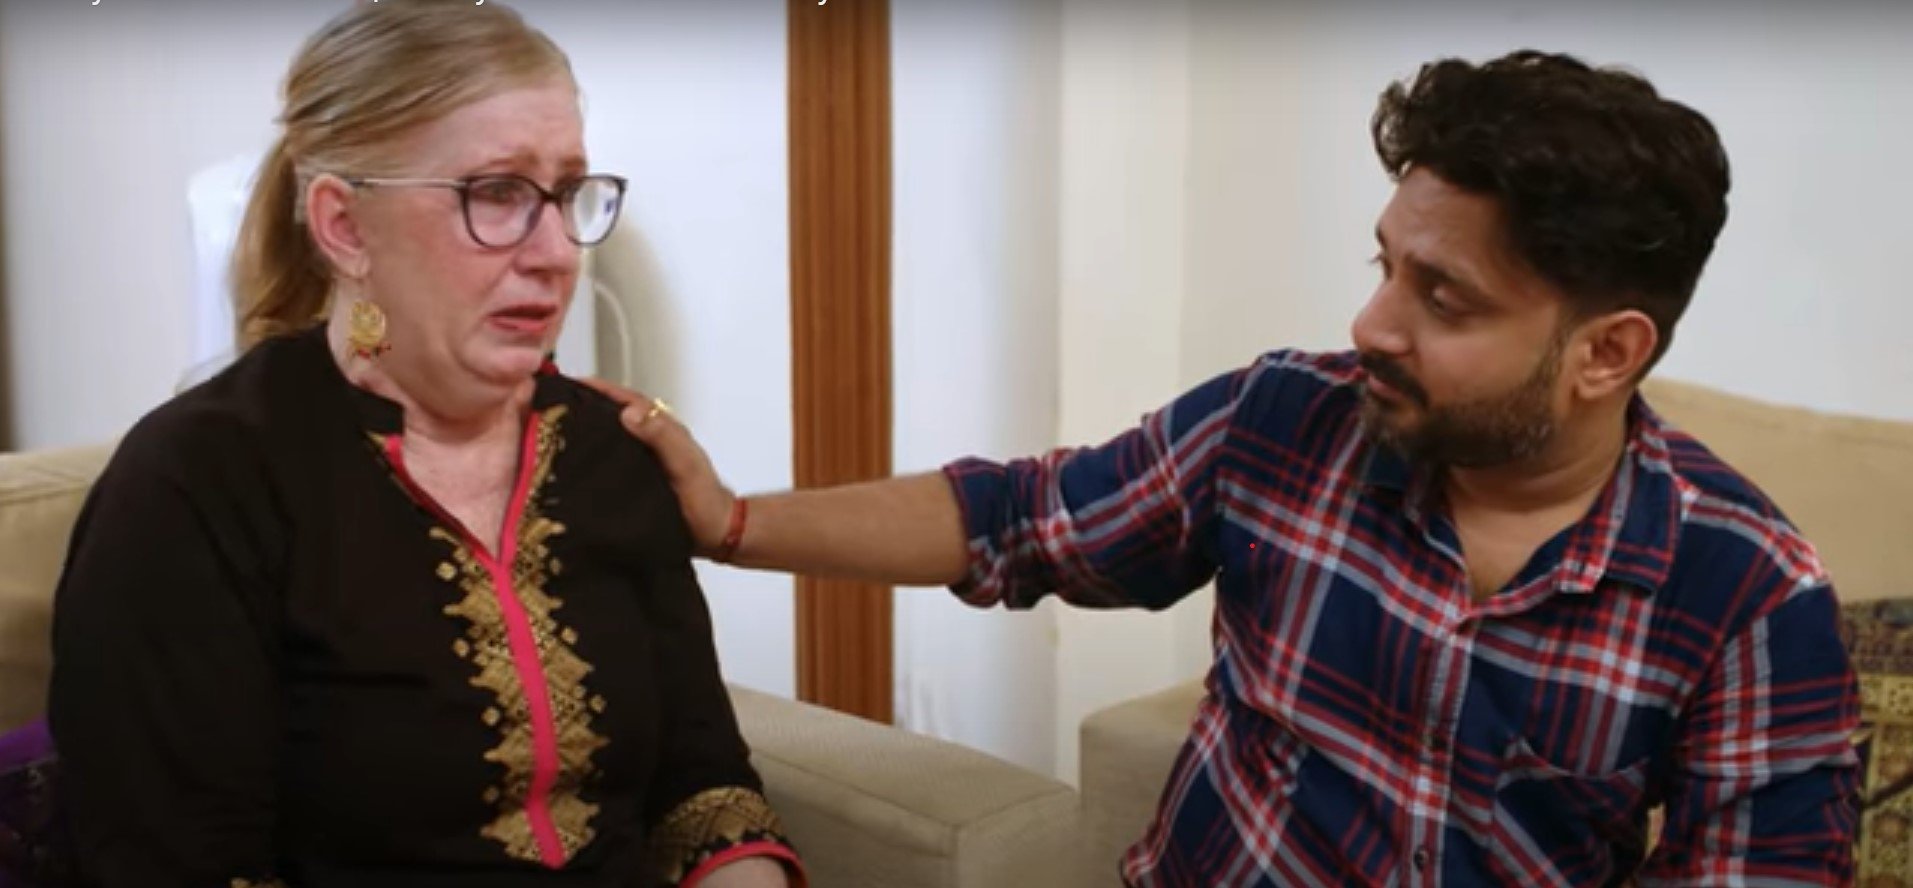 Jenny and Sumit on '90 Day Fiancé' -- Sumit consoles Jenny Slatten as she cries